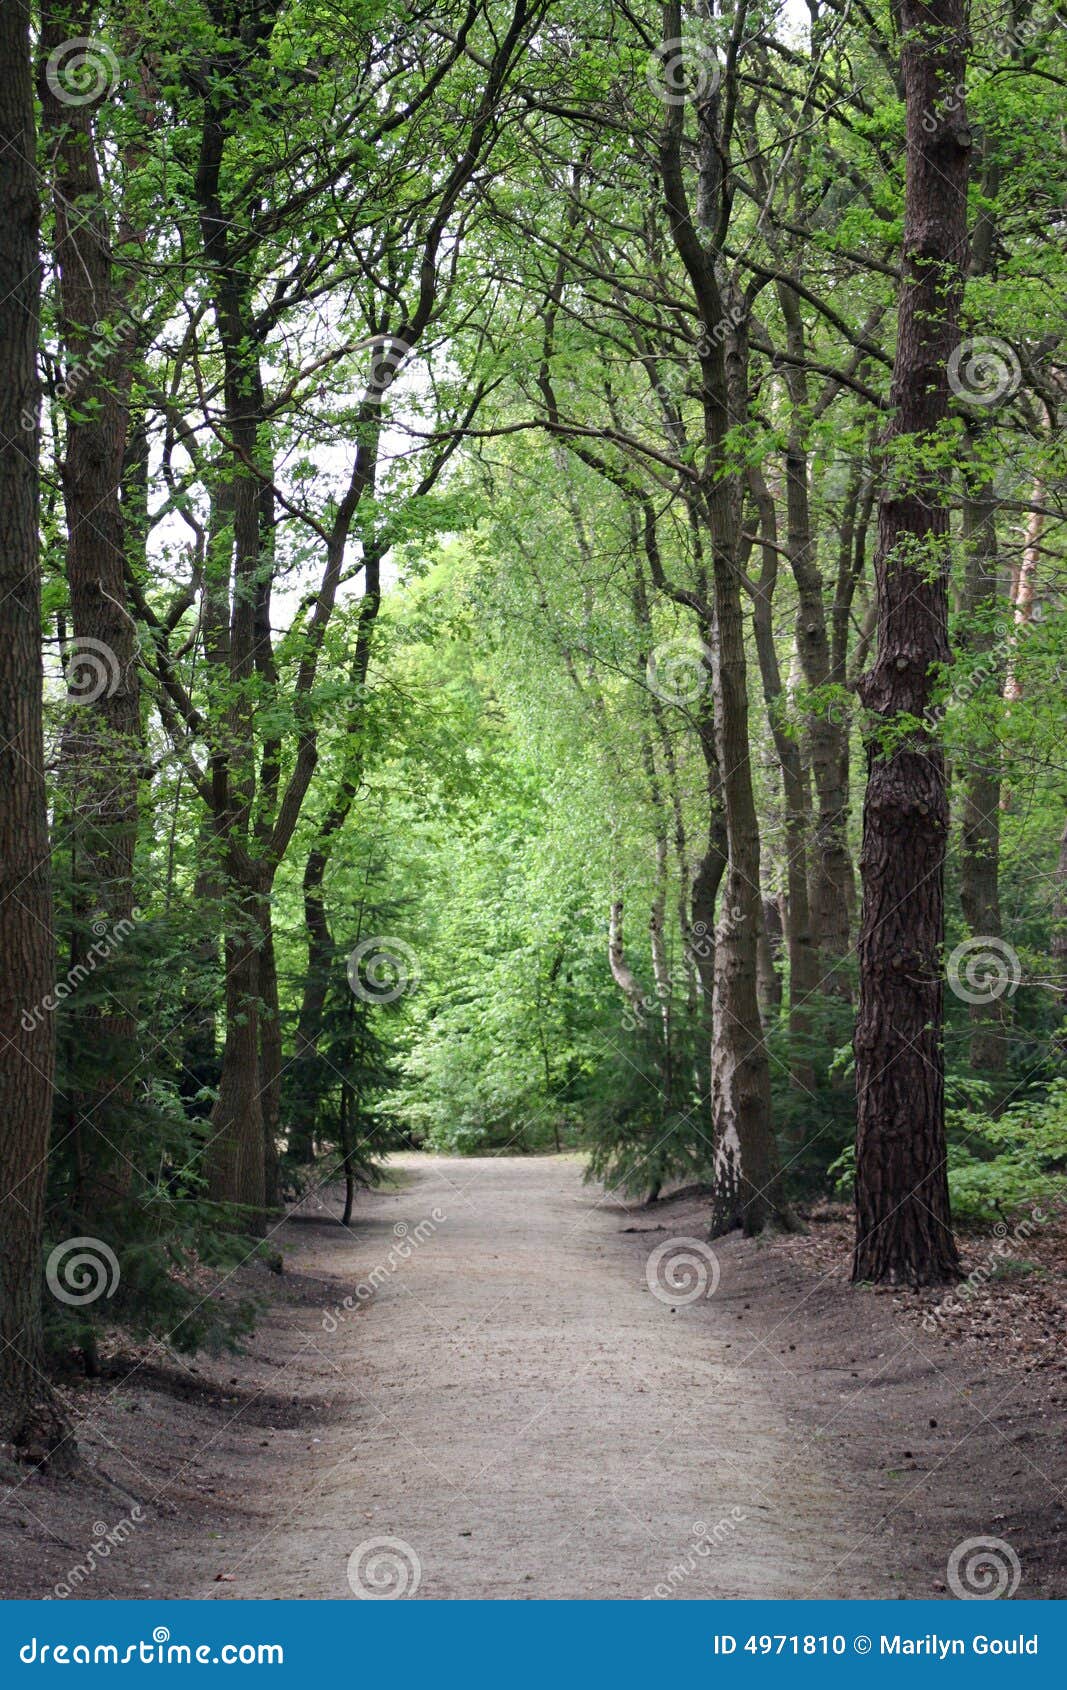 road through the woods